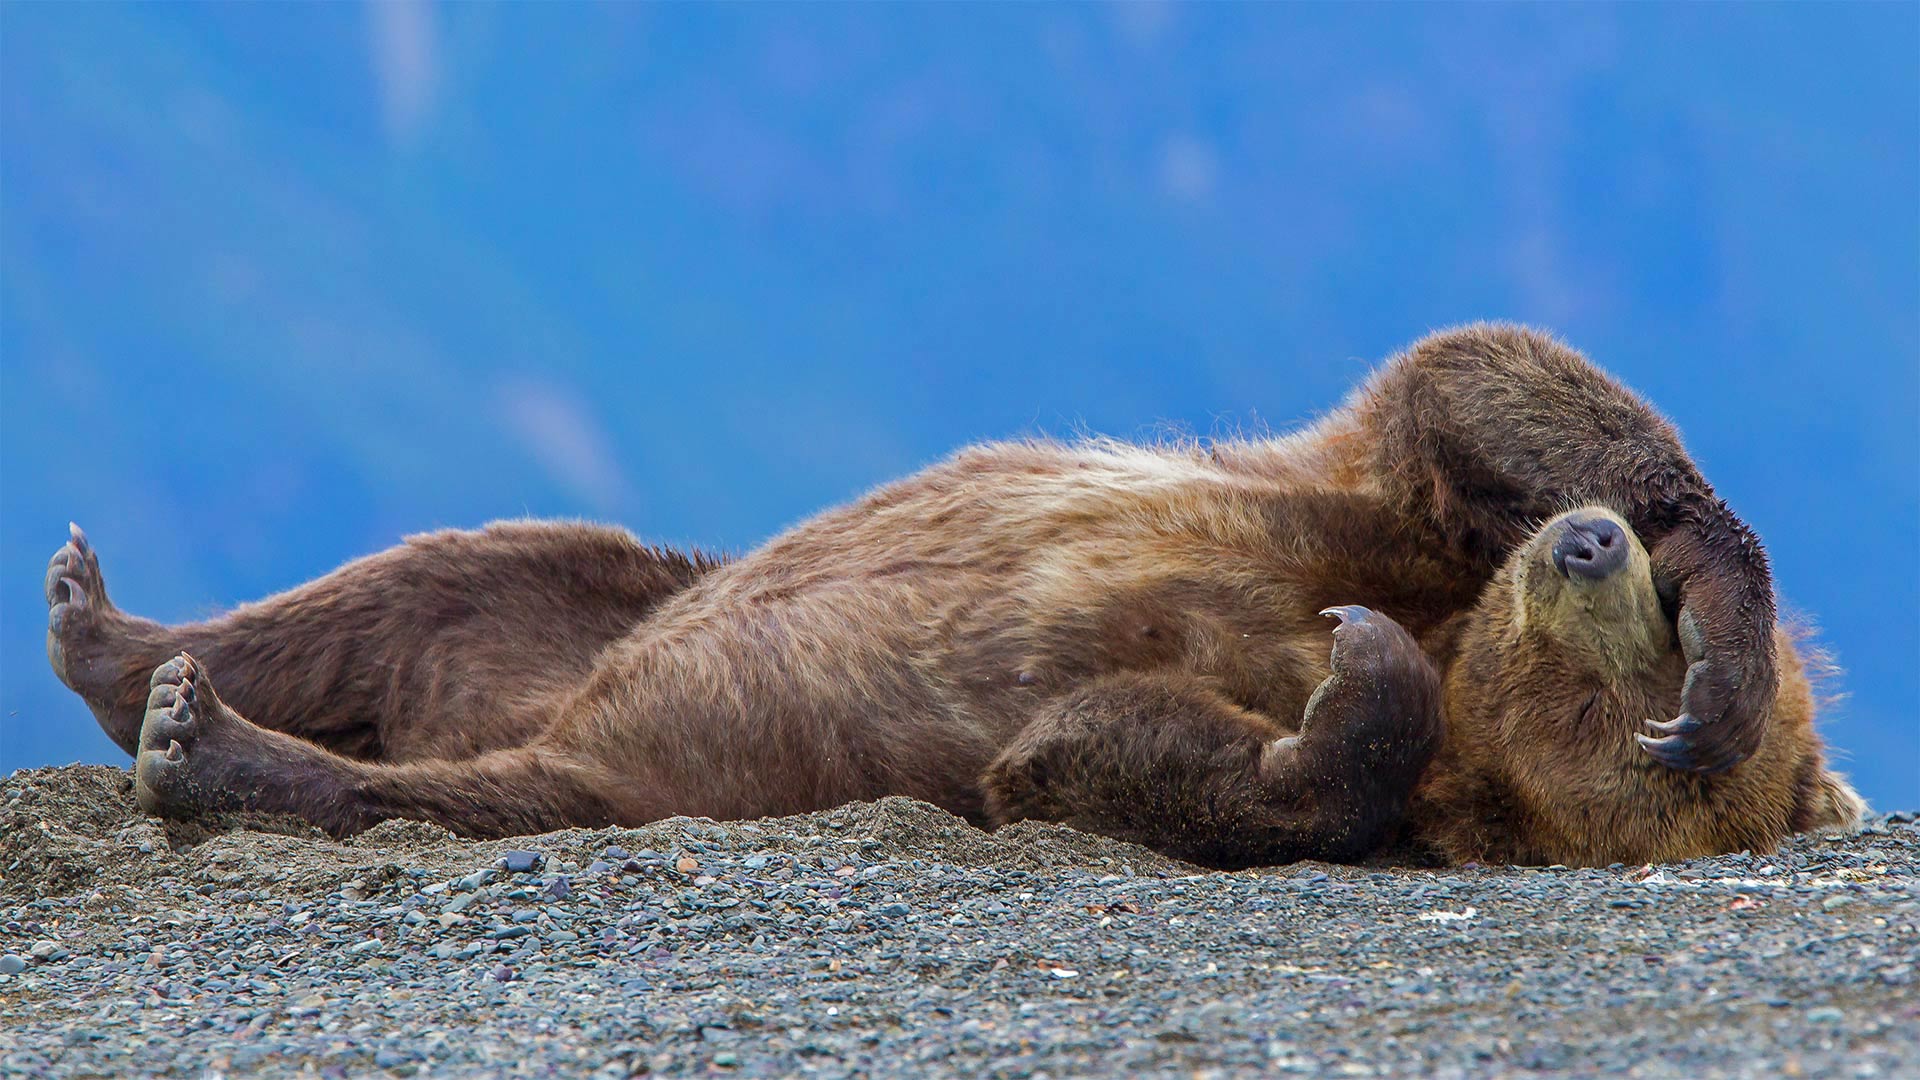 This grizzly has Napping Day down